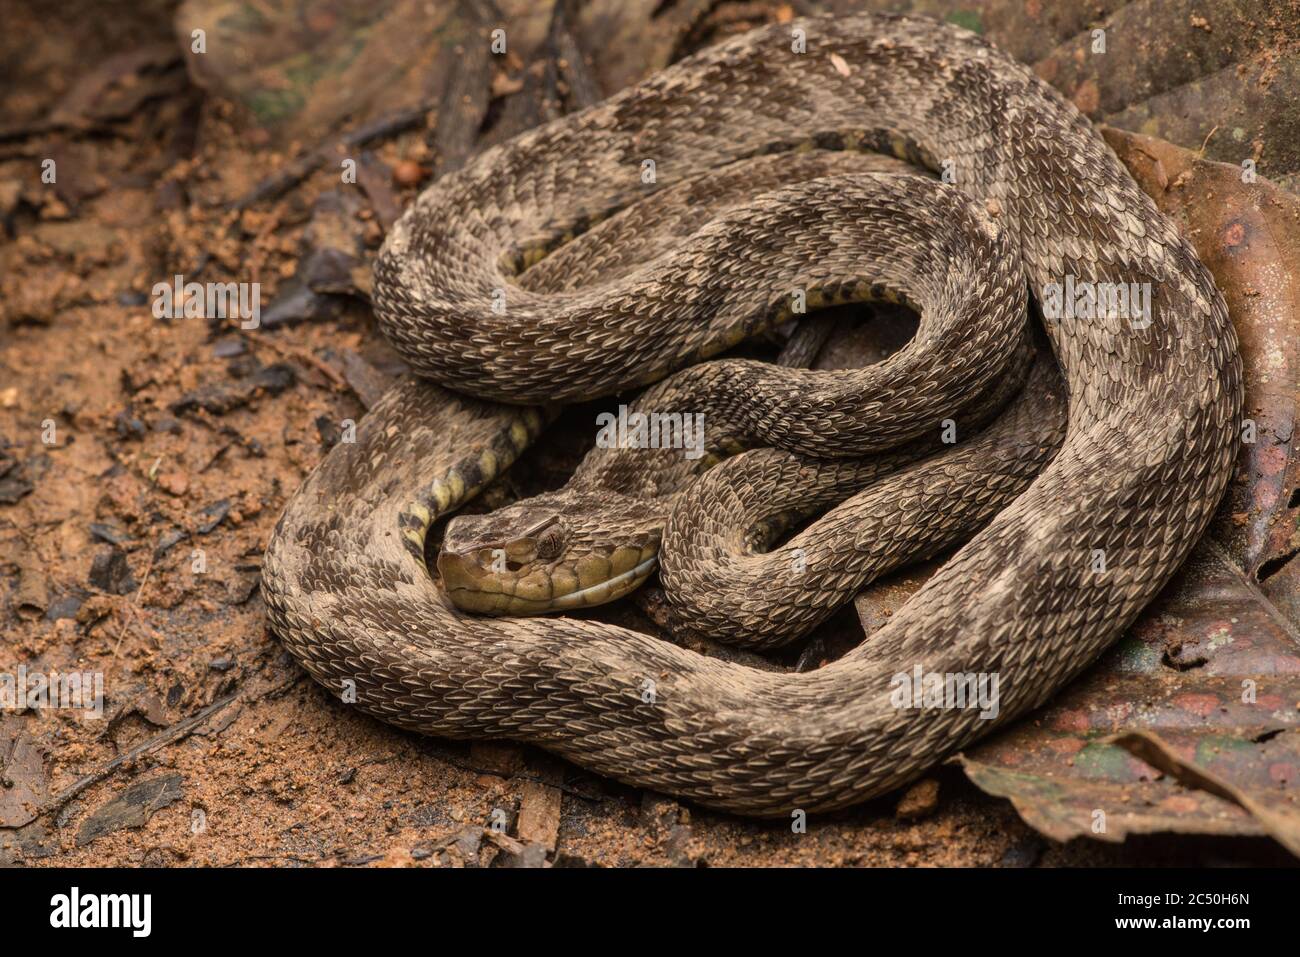 The dreaded fer de lance (Bothrops atrox), a lancehead species that is responsible for the most snake bite deaths in South America. Stock Photo